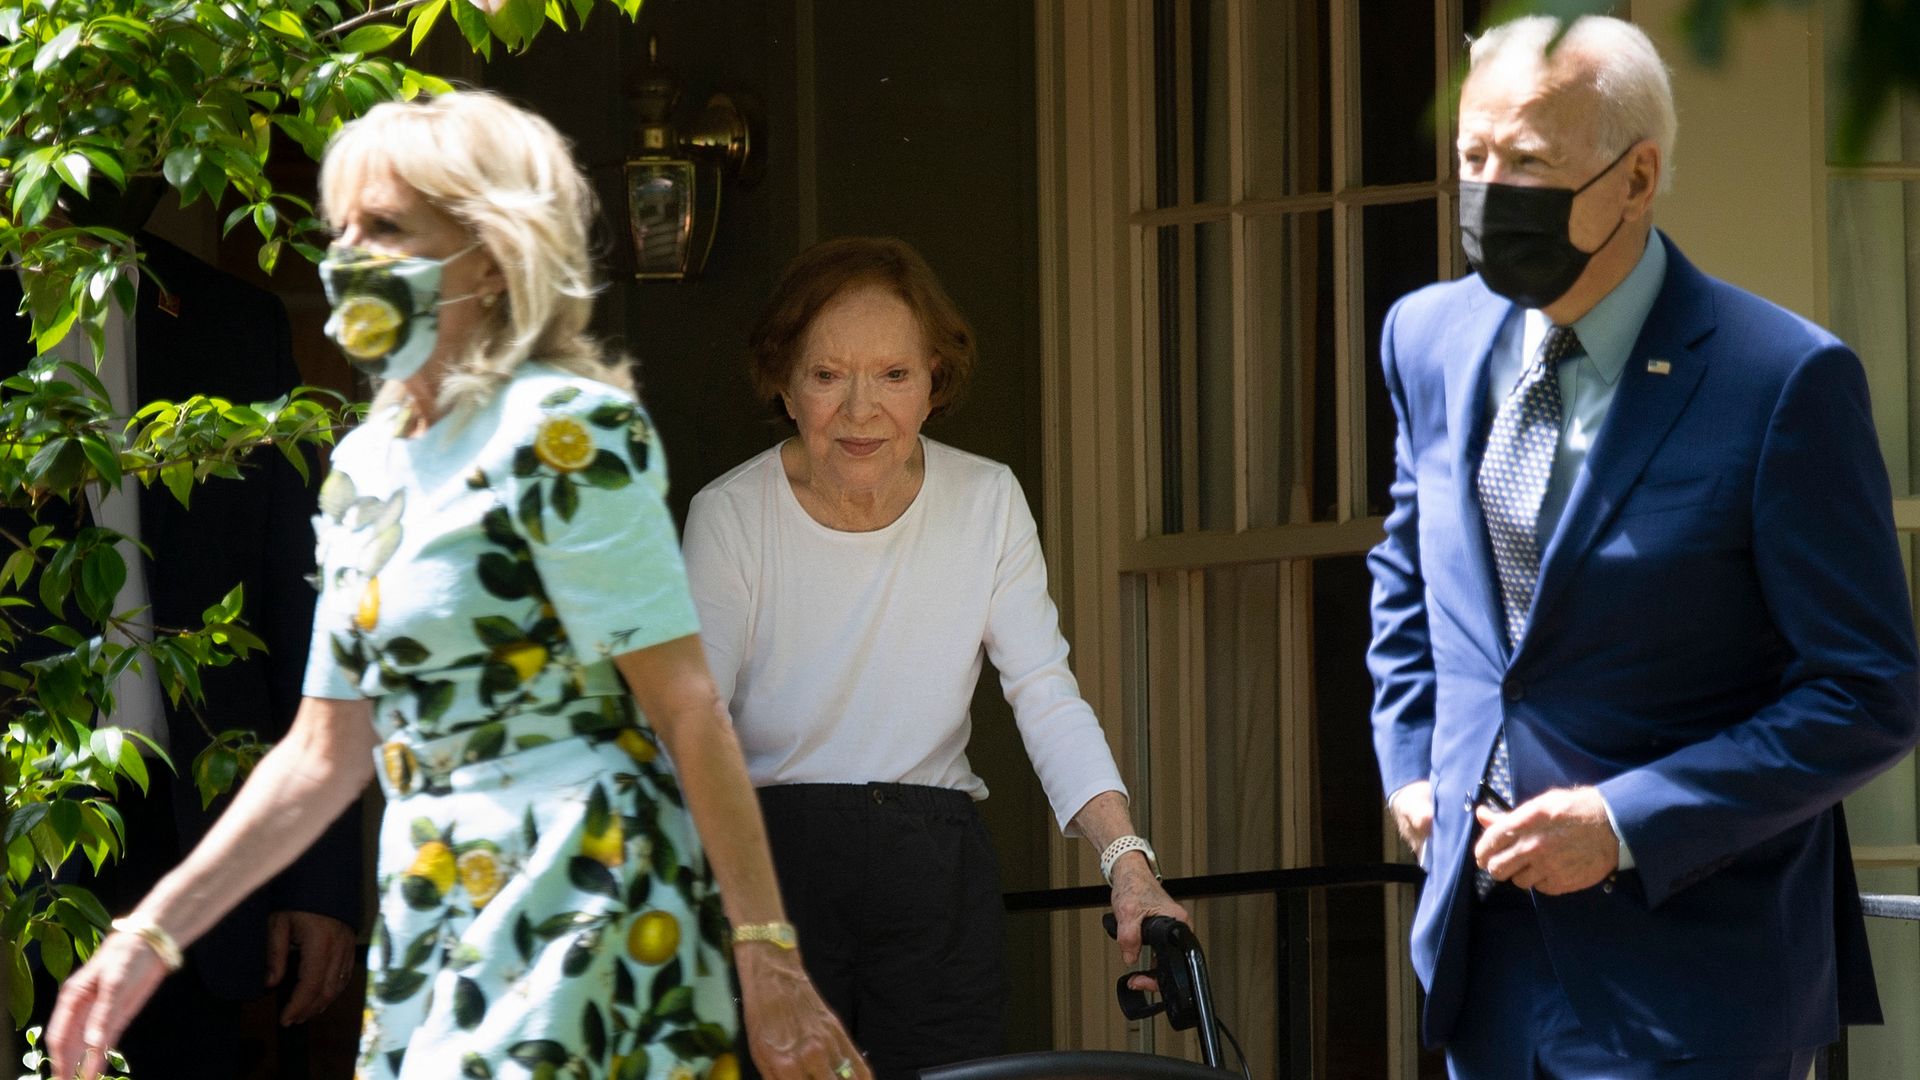 Former first lady Rosalynn Carter is seen with first lady Jill Biden and President Biden after they visited former President Carter.